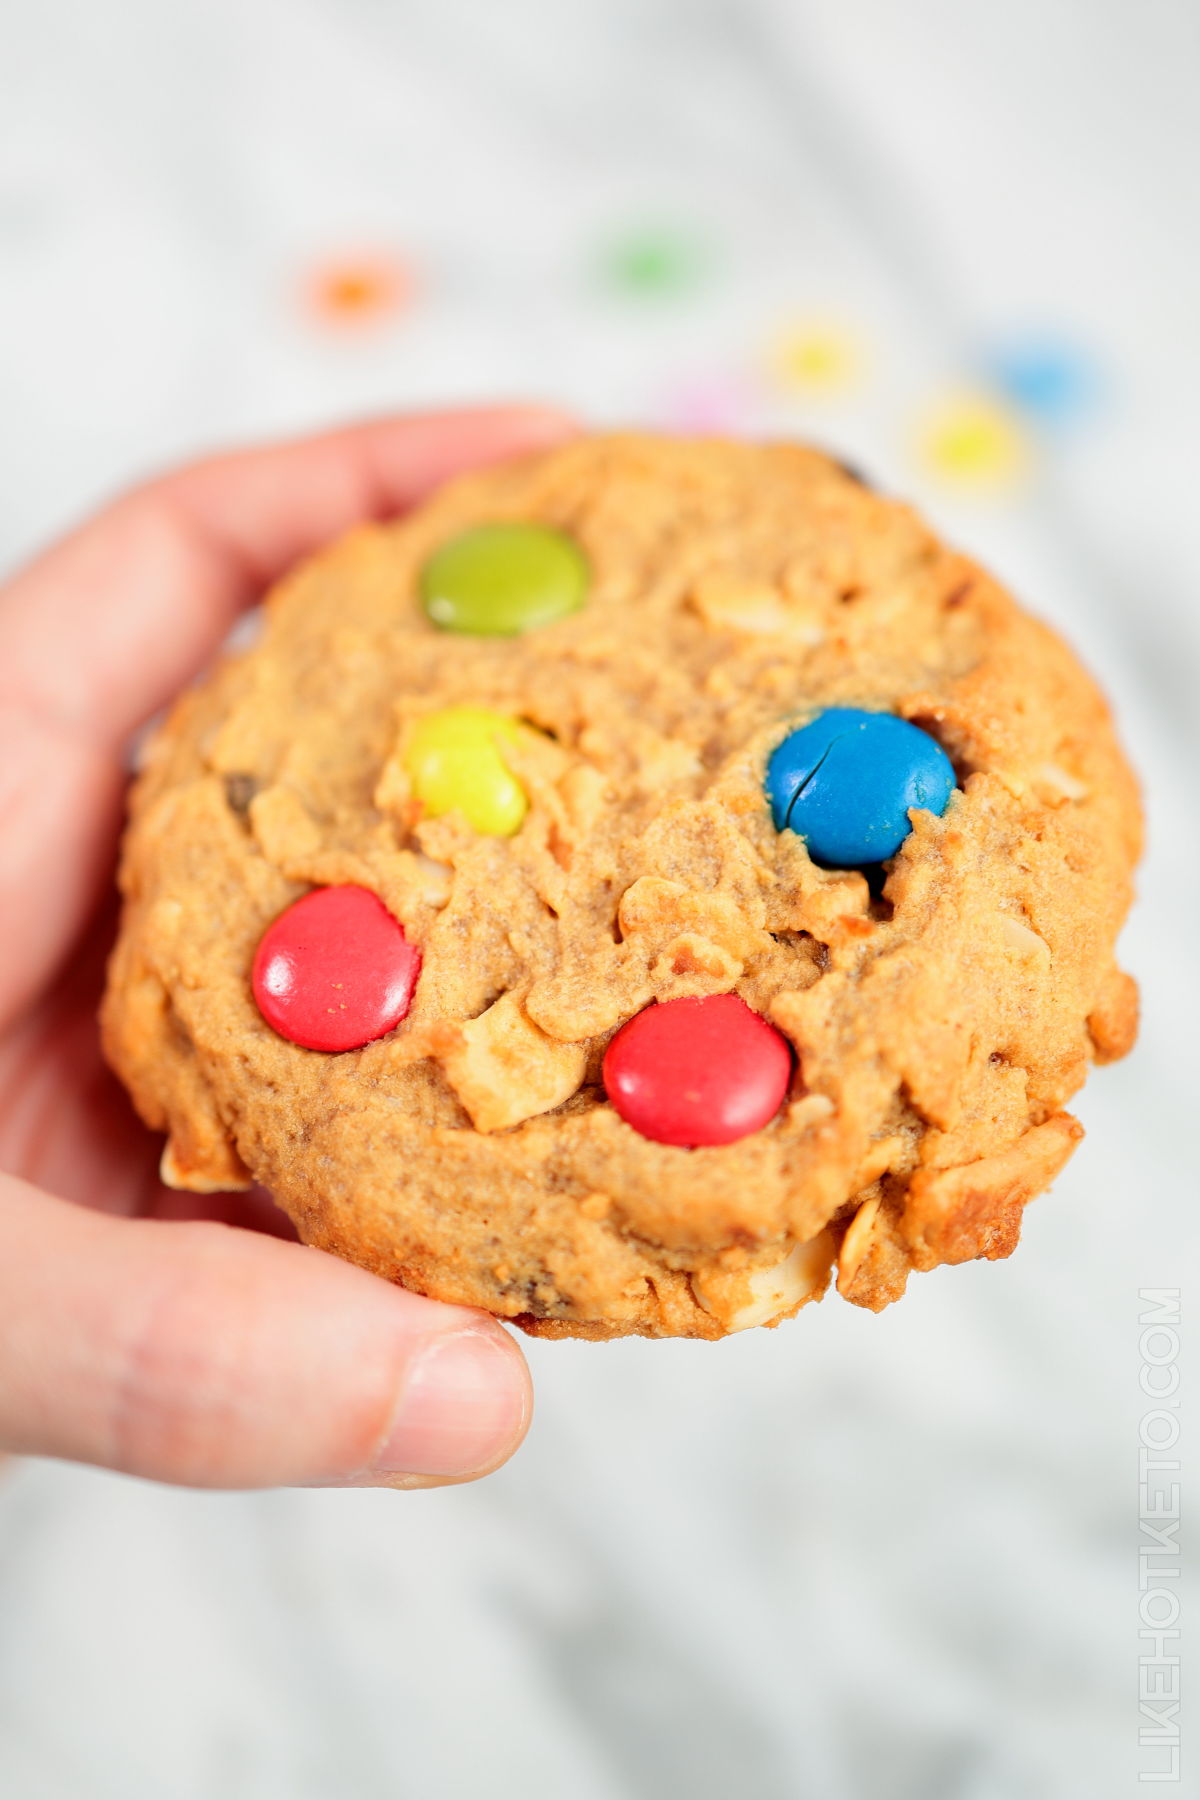 A large keto monster cookie with colorful m&m's.